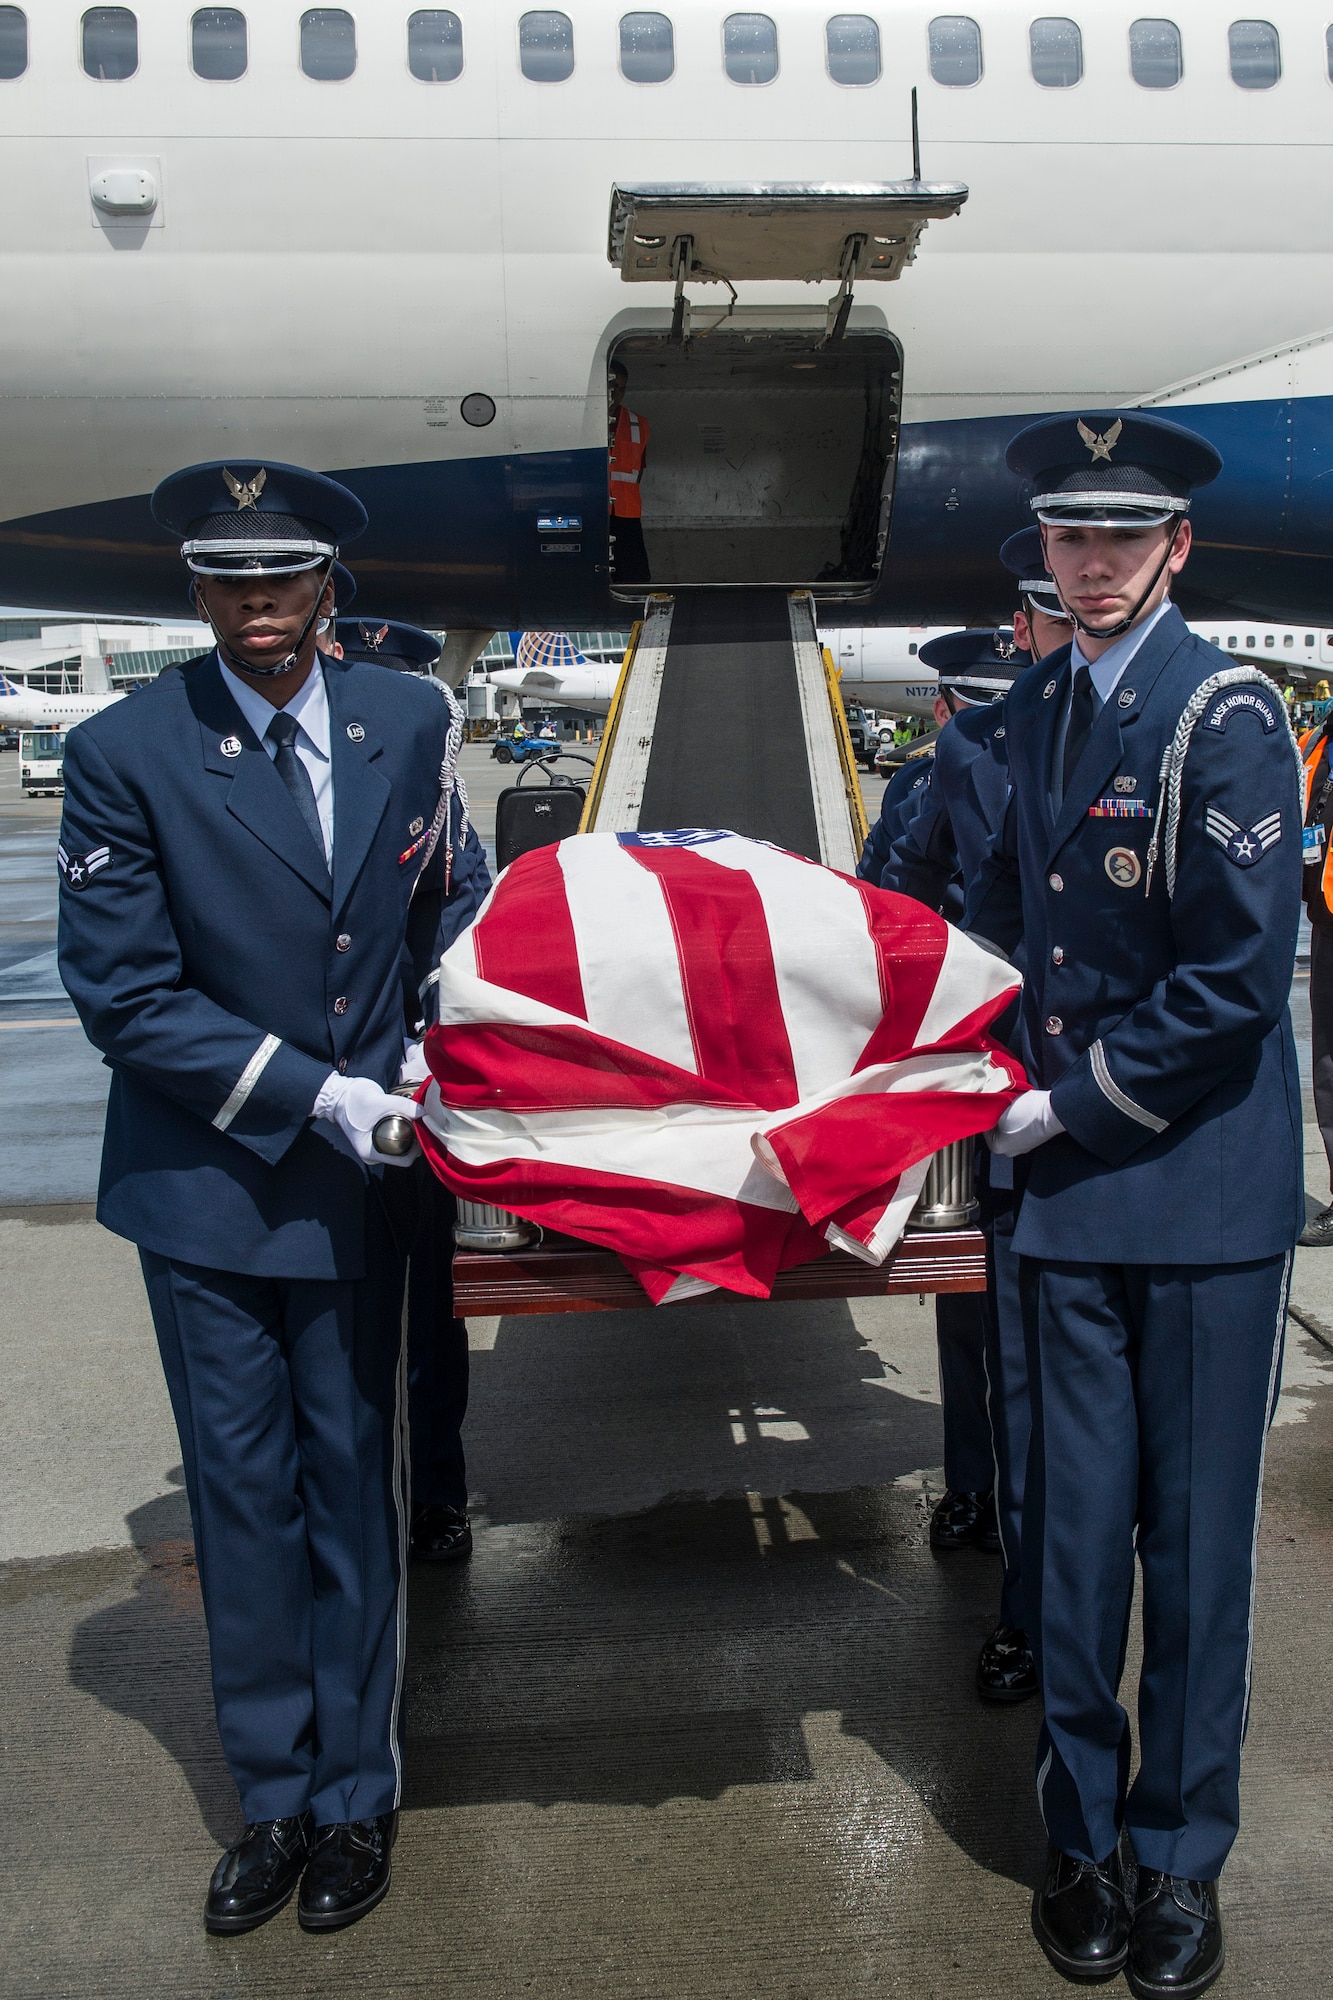 Members of the McChord Field Honor Guard transfer the remains of Capt. Douglas D. Ferguson to an awaiting hearse May 1, 2014, at Seattle-Tacoma Airport in SeaTac, Wash. Ferguson, a native of Tacoma, Wash., had been missing since his aircraft was shot down over Laos Dec. 30, 1969. (U.S. Air Force photo/Tech. Sgt. Sean Tobin)